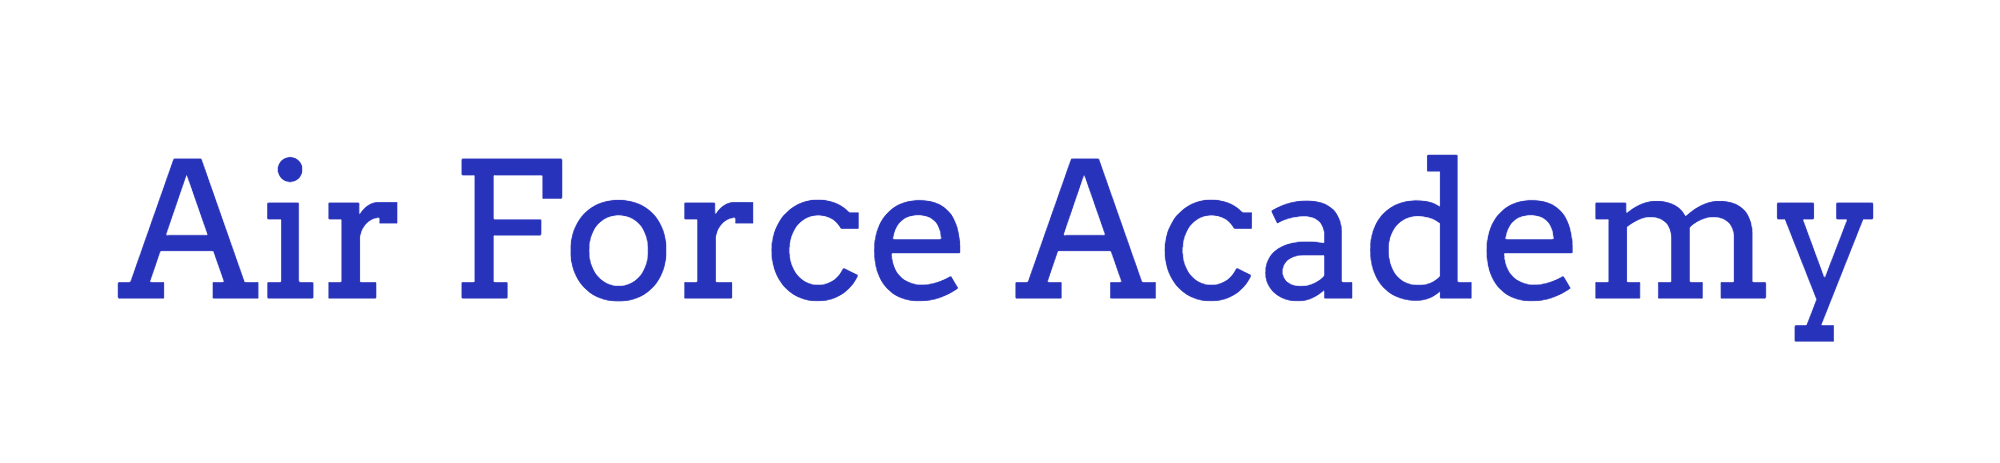 Air Force Academy-logo.png